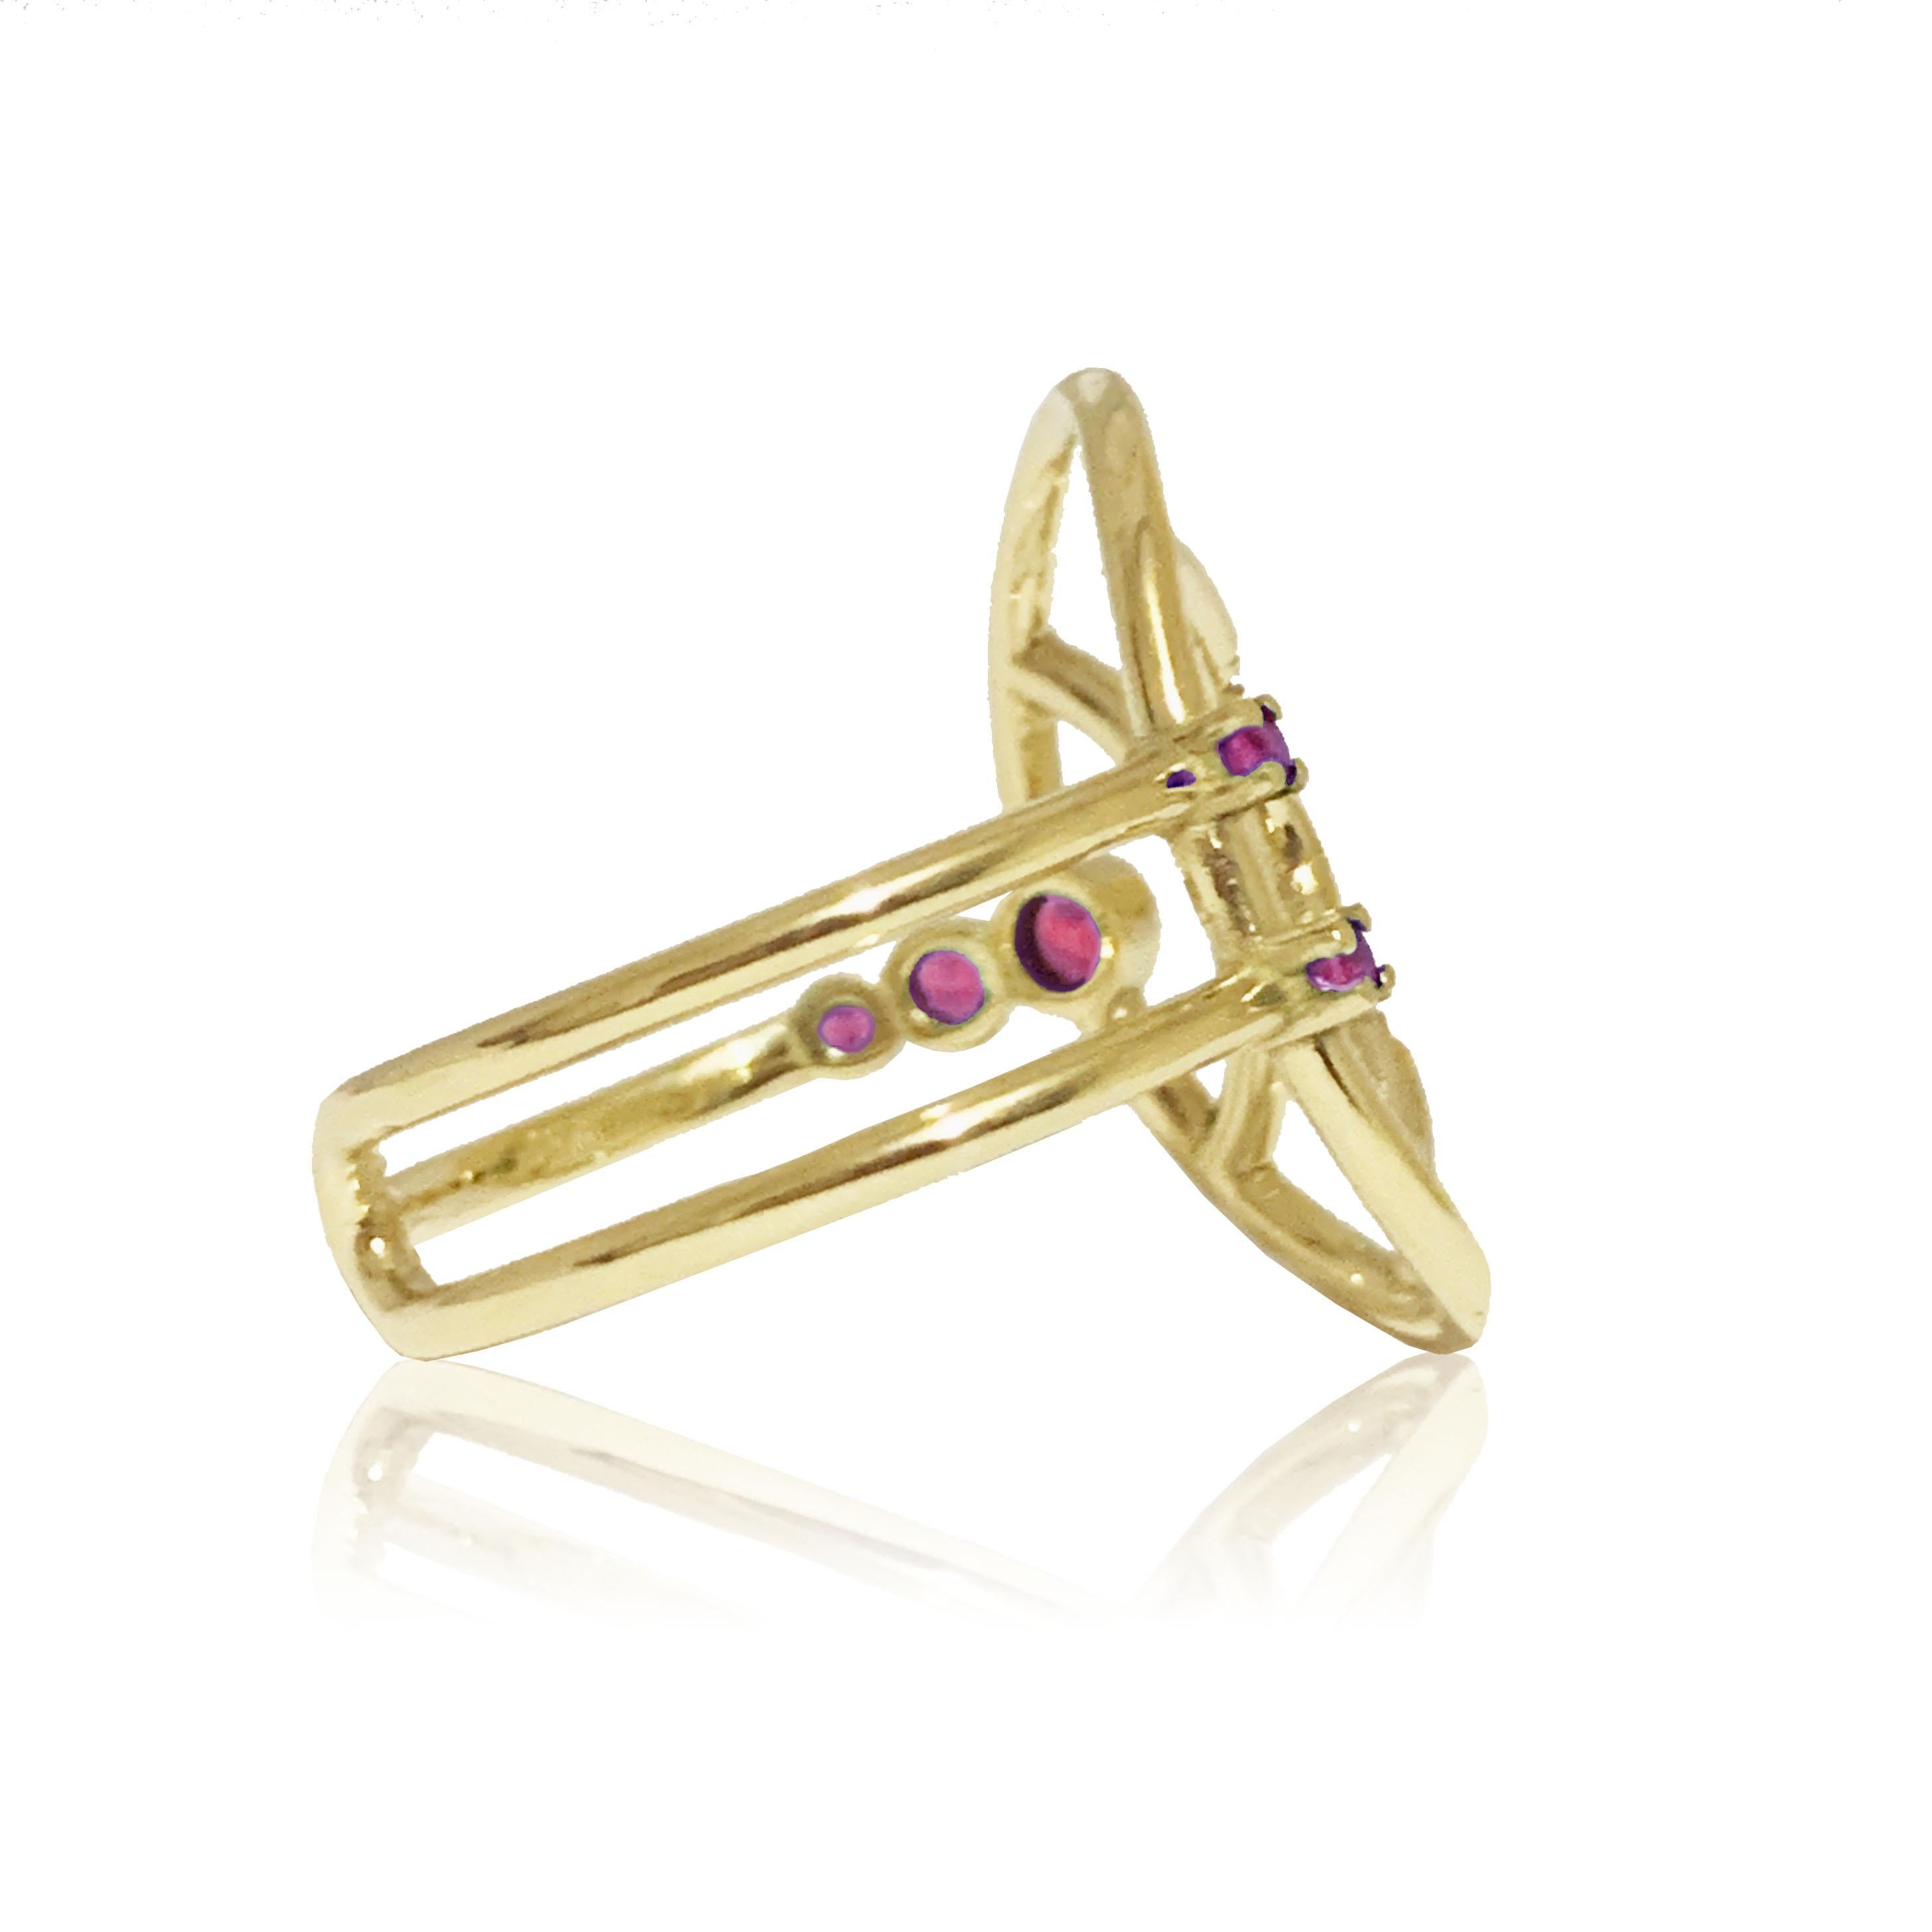 Interlocking Geometry Oval Ring with Rubies and Diamonds in 18 Karat Gold 3